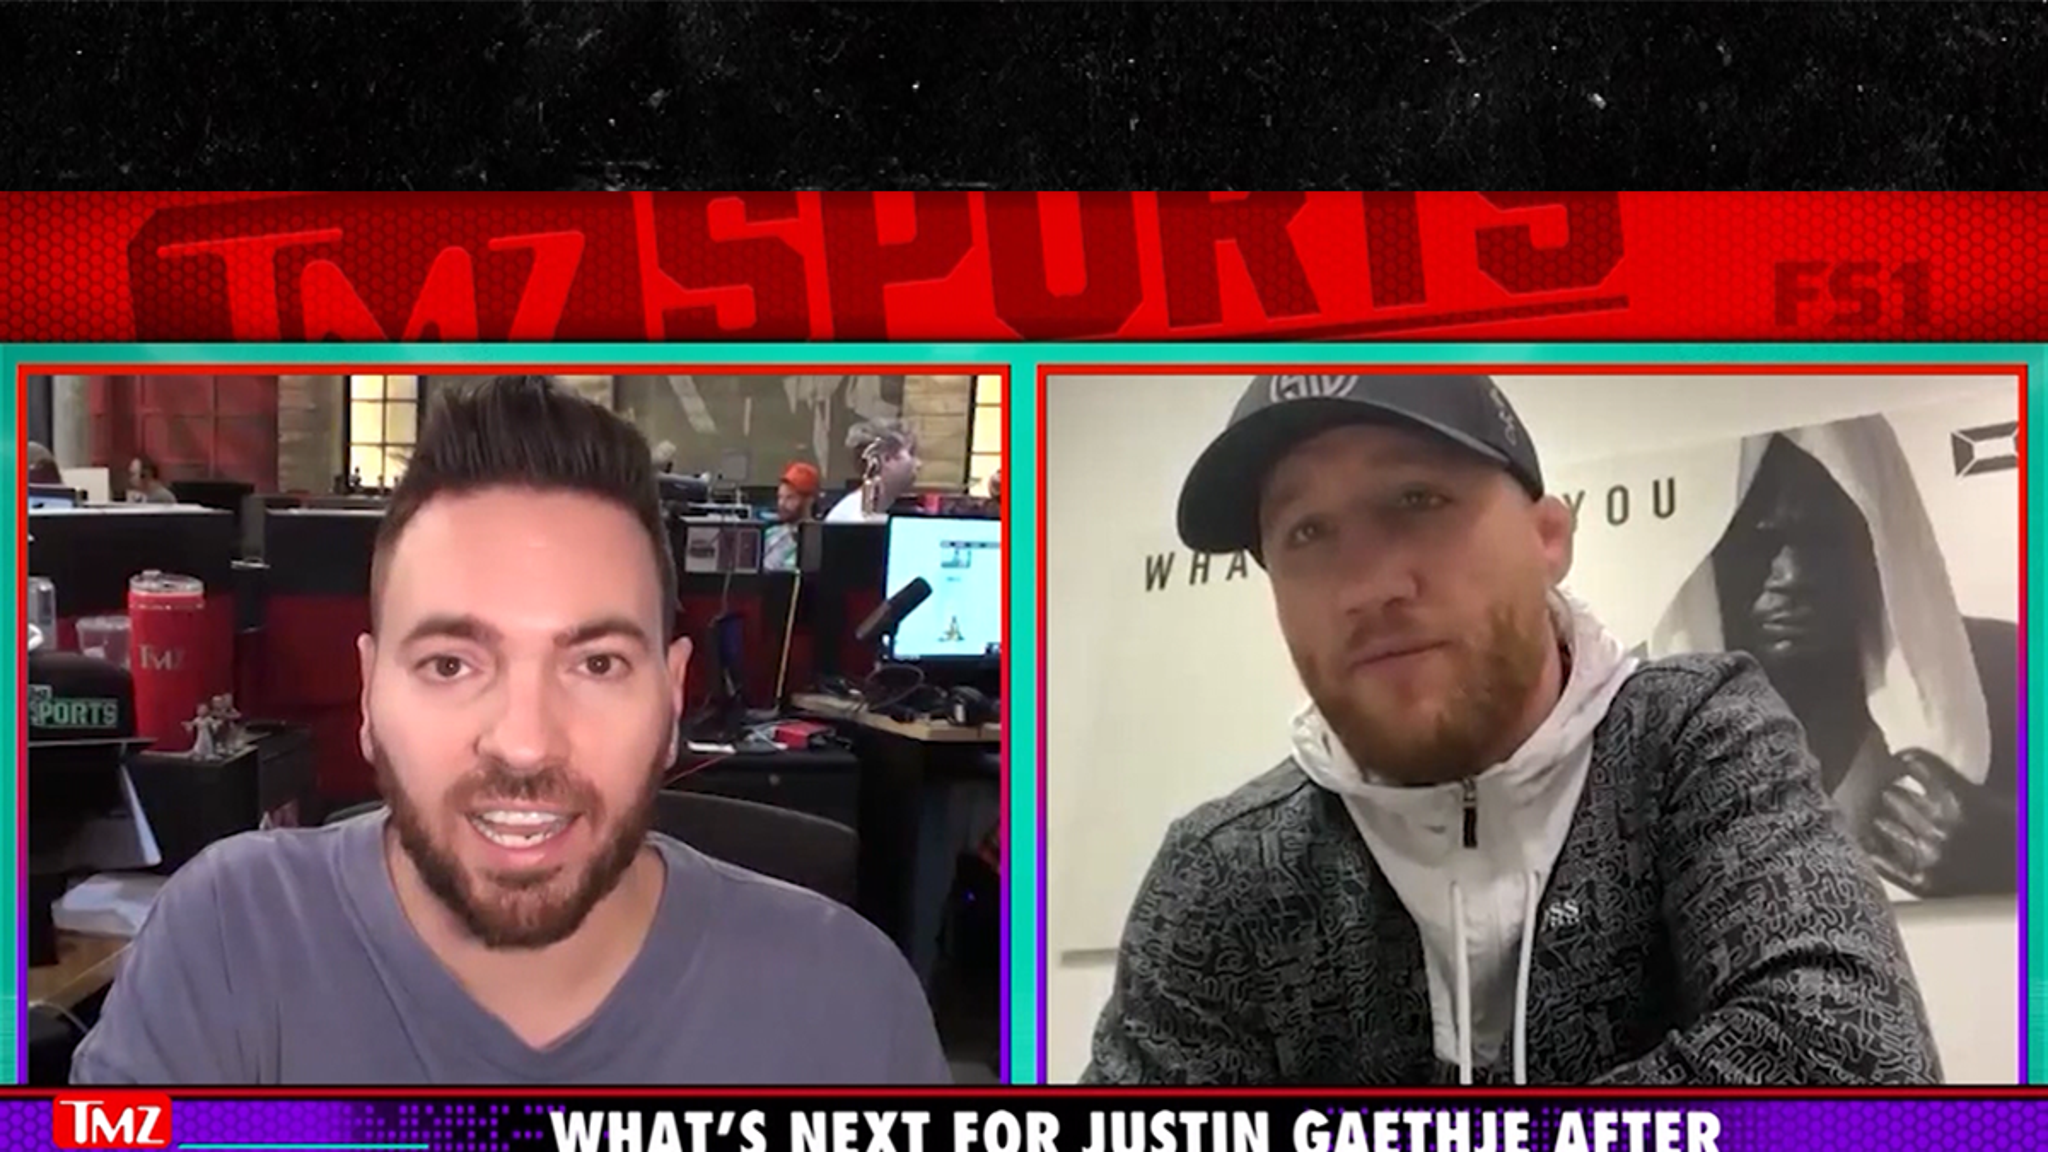 Justin Gaethje wants Poirier next, believing he can beat Islam Makhachev.